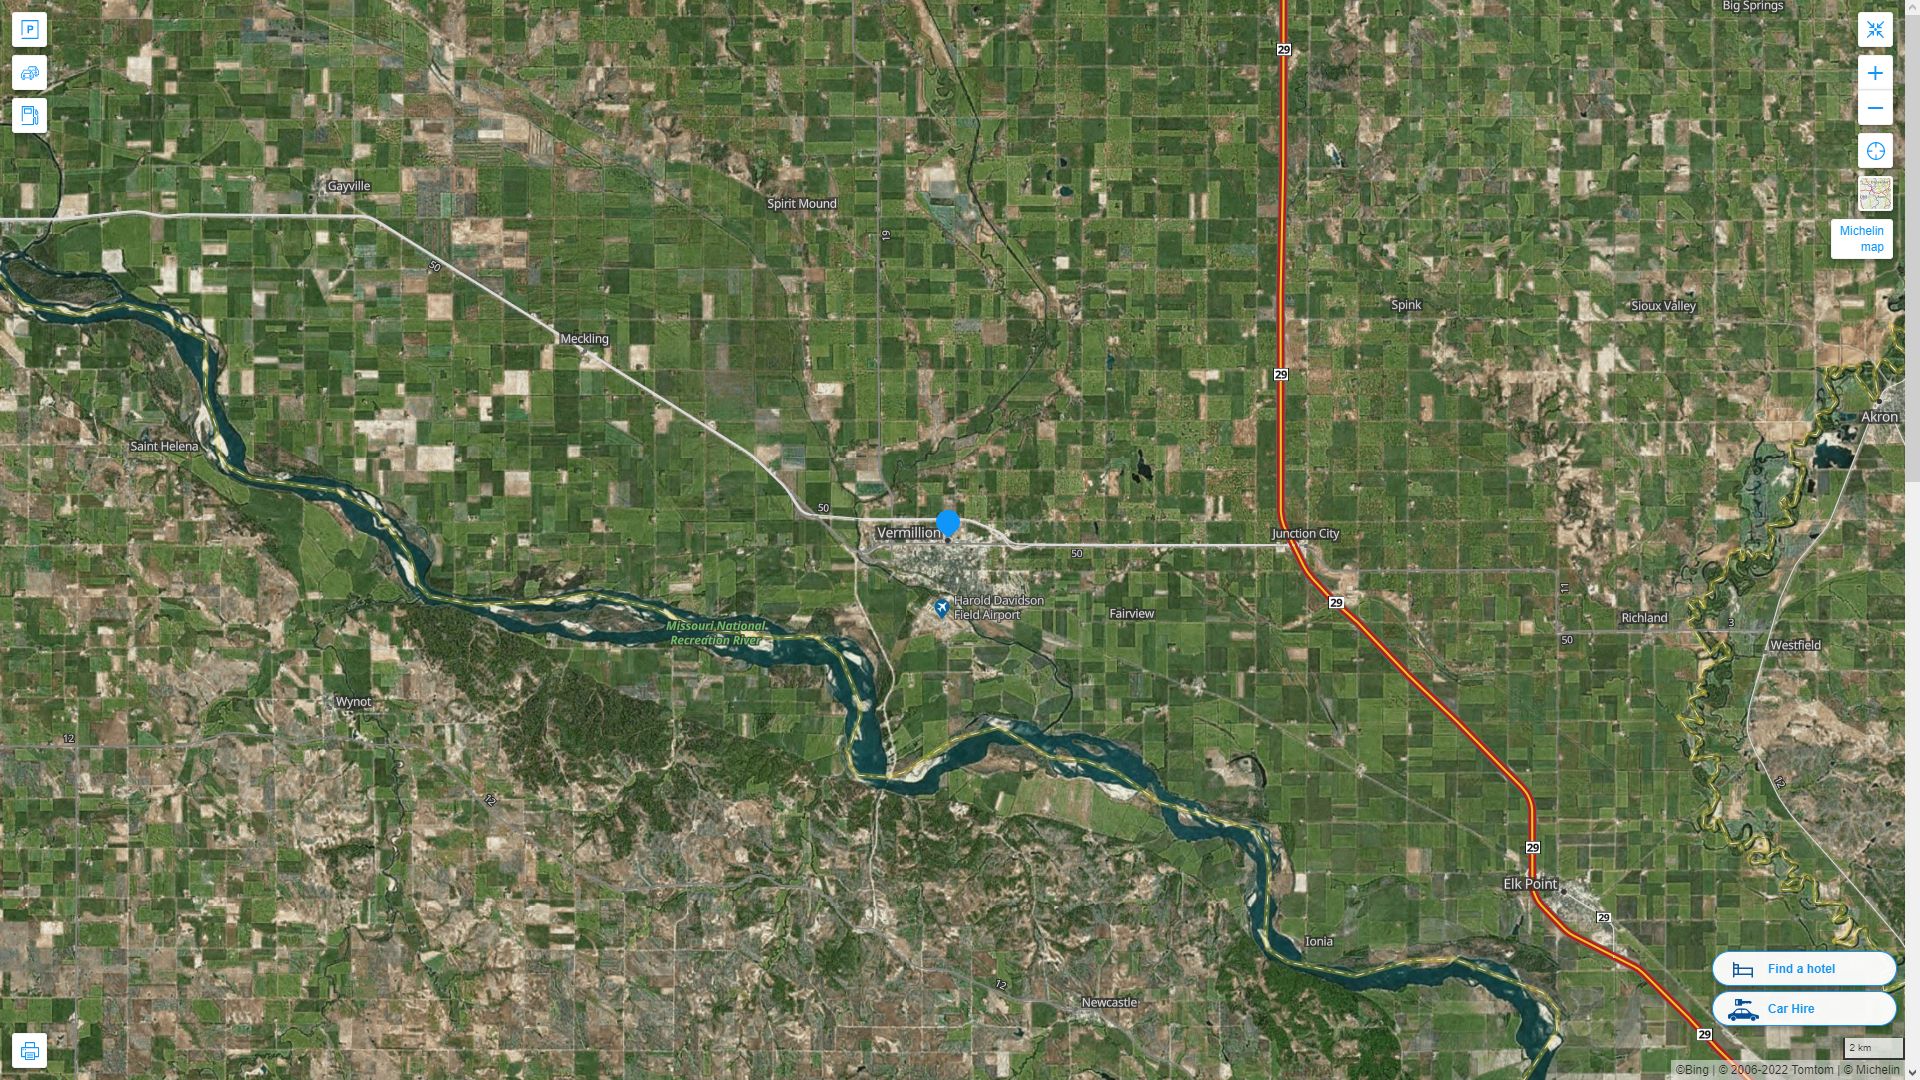 Vermillion South Dakota Highway and Road Map with Satellite View